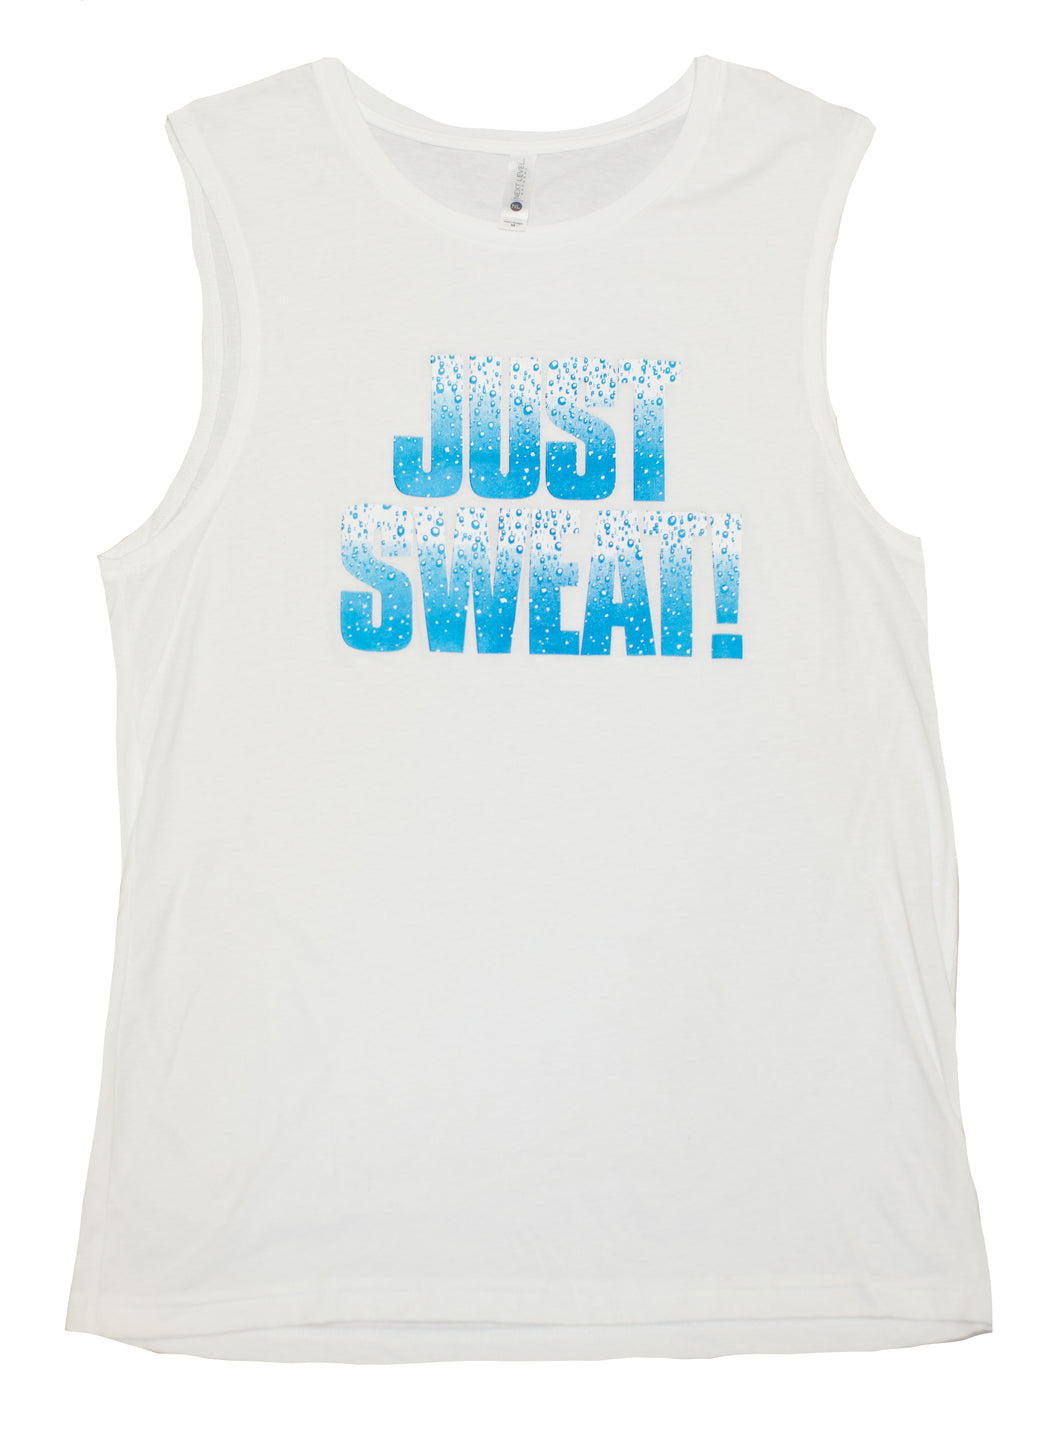 Mens Muscle Tank (White)